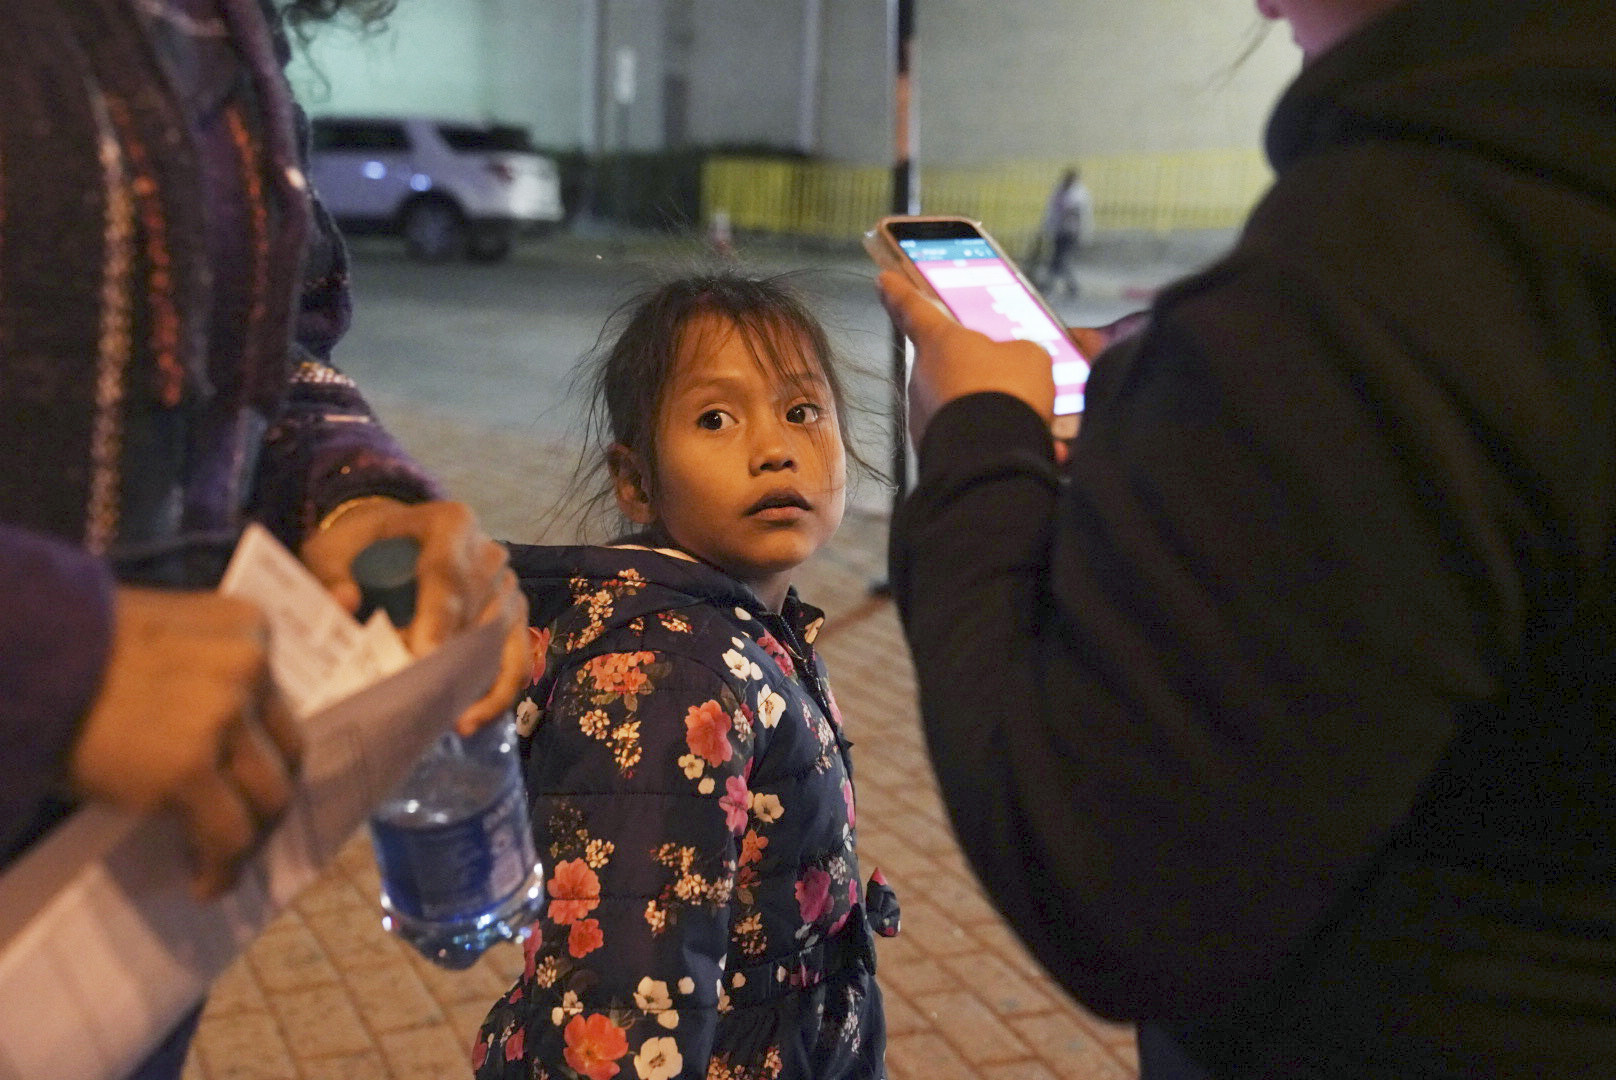 A 7-year-old asylum-seeker waits as her mother Isabel, right, and immigration lawyer Charlene D'Cruz, left, as they figure out where they will be spending the night after being processed at the Port of Entry in Brownsville, Texas, on Dec. 17, 2019. (Veronica G. Cardenas—AP)